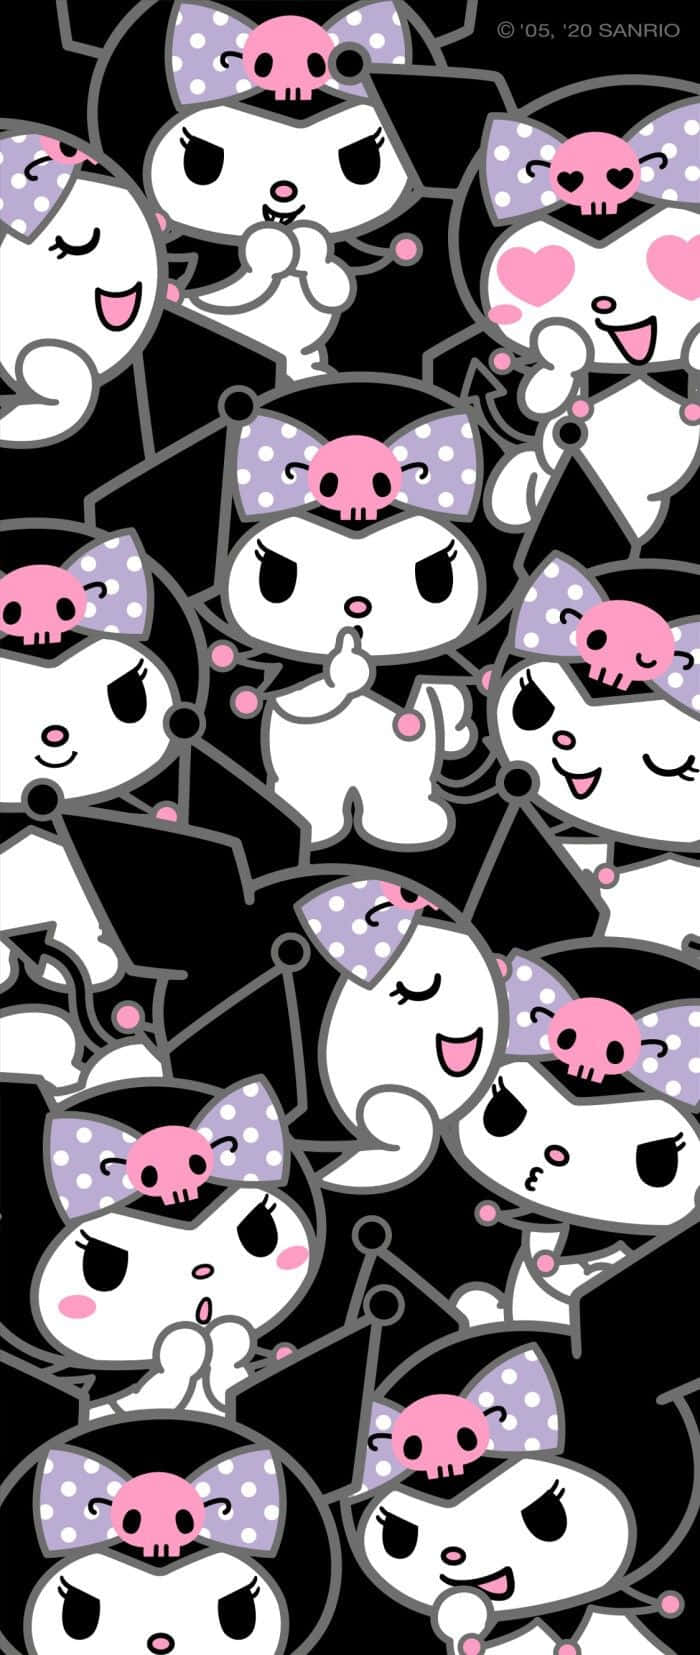 Show Your Emotional Side with Emo Hello Kitty Wallpaper